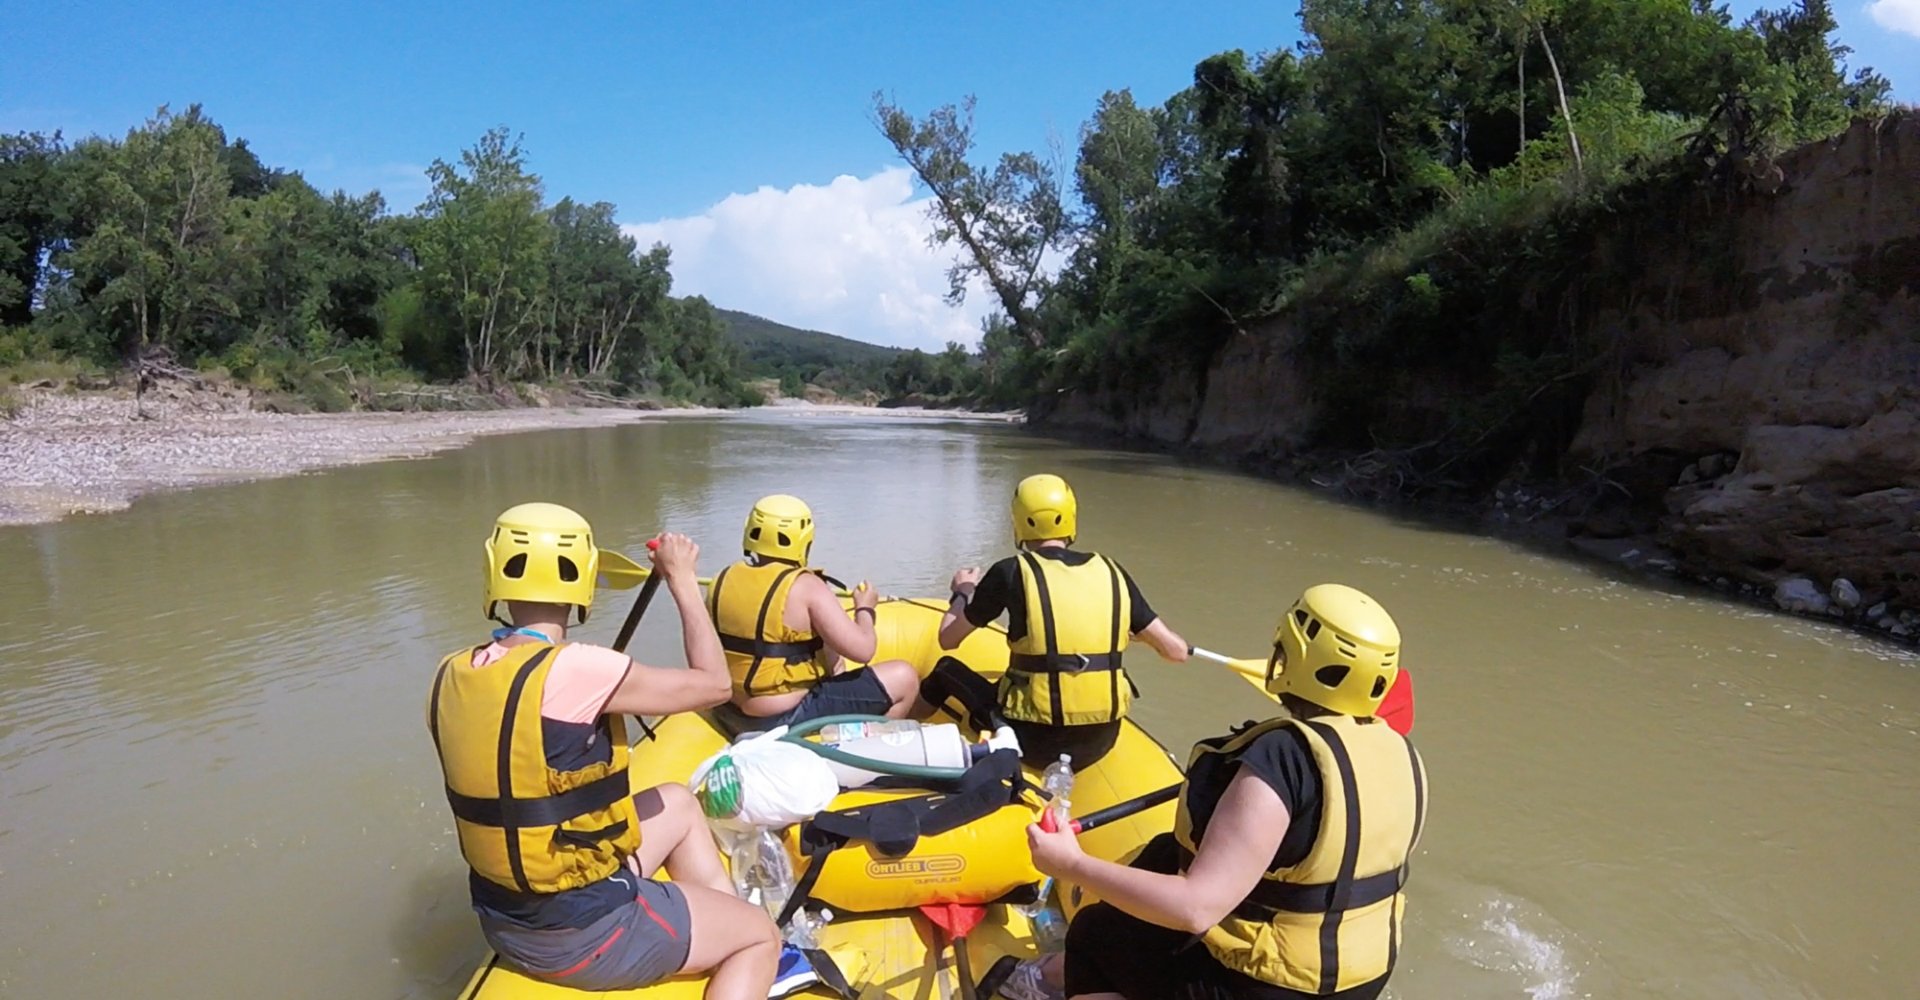 Rafting in the Marema, along the Ombrone river